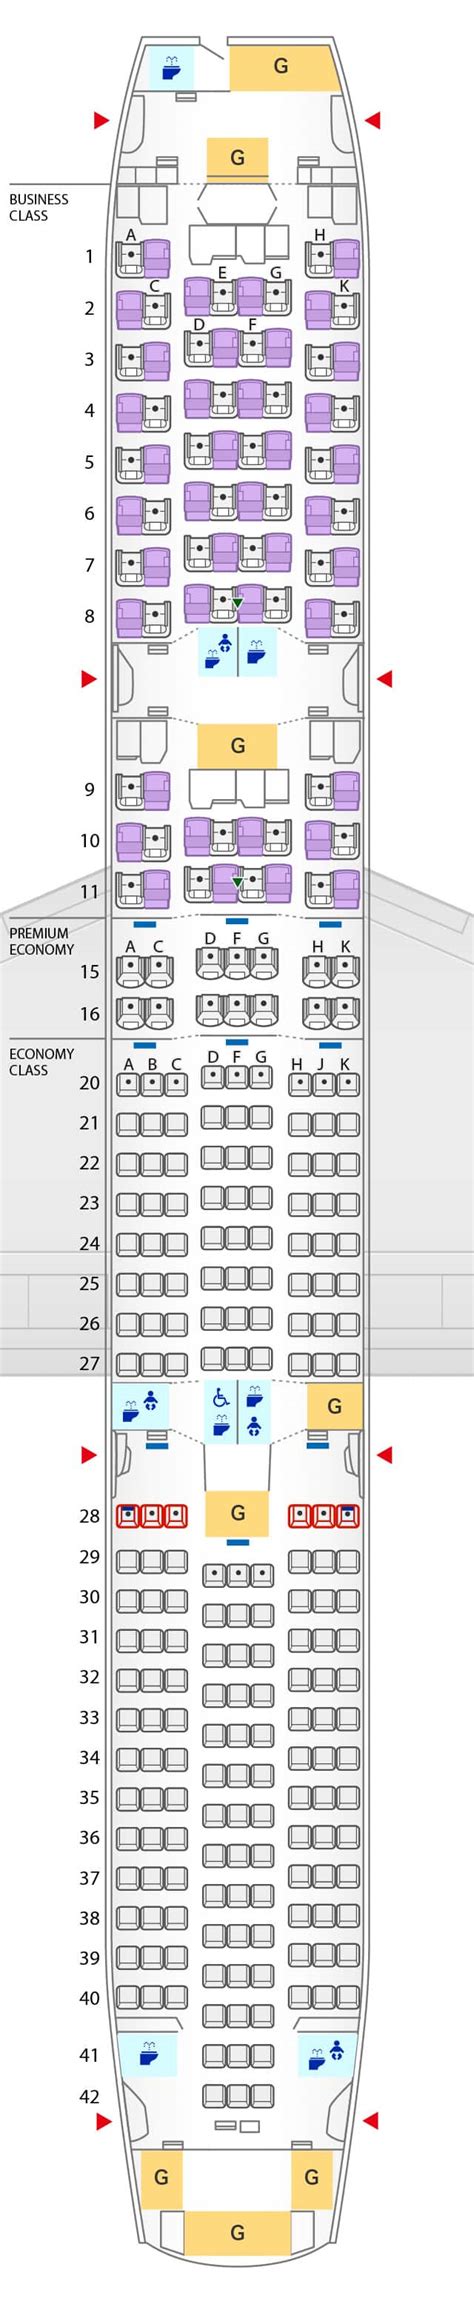 787-9 seat map. Bulk Head Seats. Bulk Head Seats are present in Row 21, 31 and 44DEG. Get Vistara Boeing 787-9 Dreamliner seating details and other information including emergency exit seats and bulk head seats. We ensure you enjoy … 